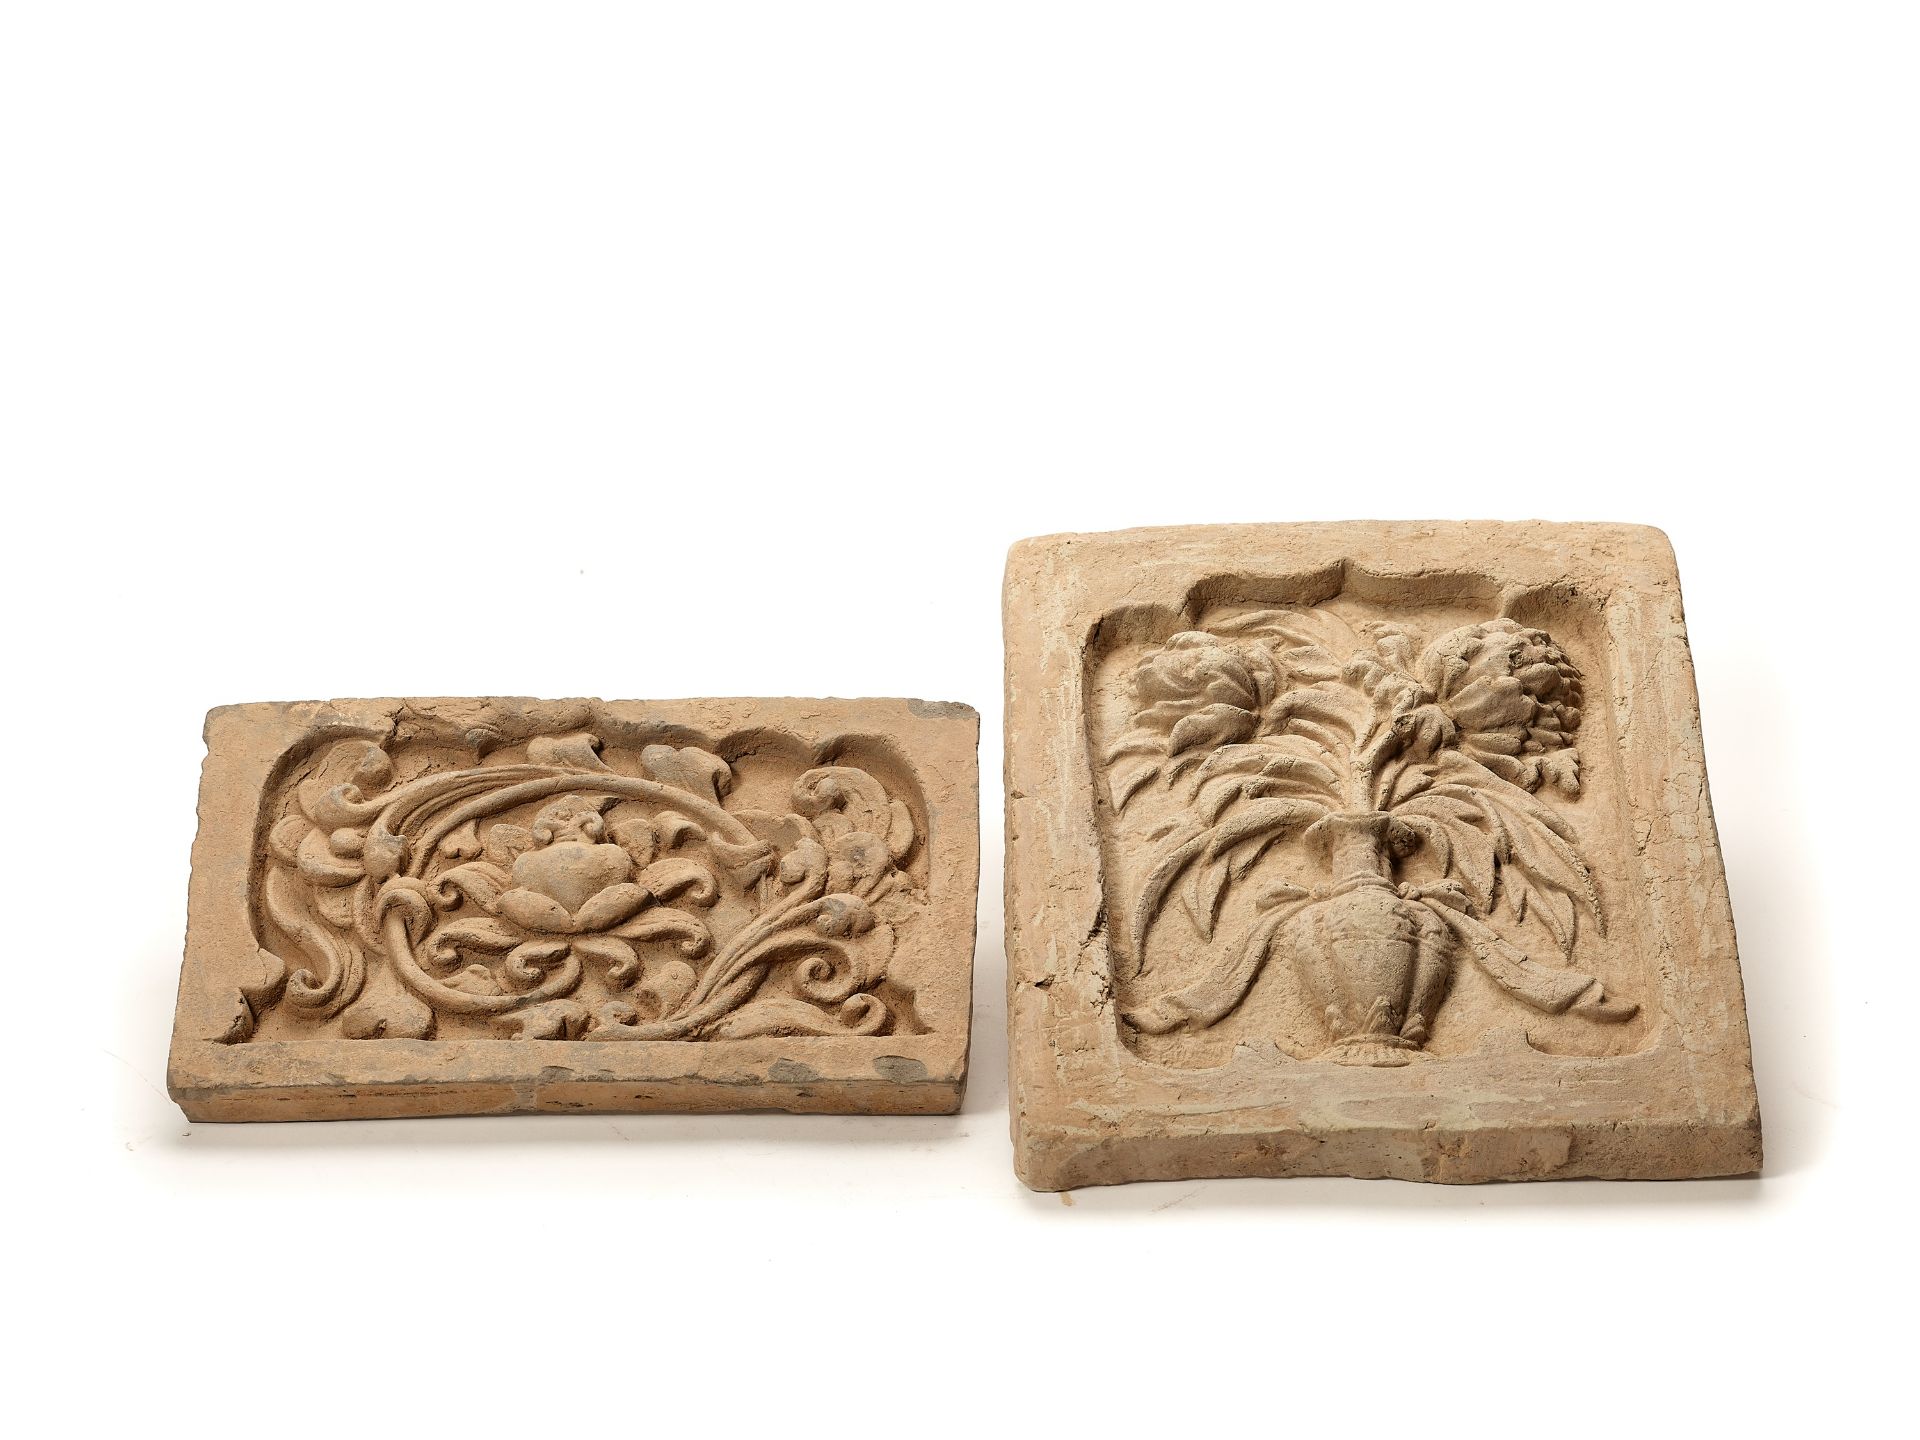 TWO TL-TESTED CHINESE CERAMIC WALL TILES, TANG DYNASTY